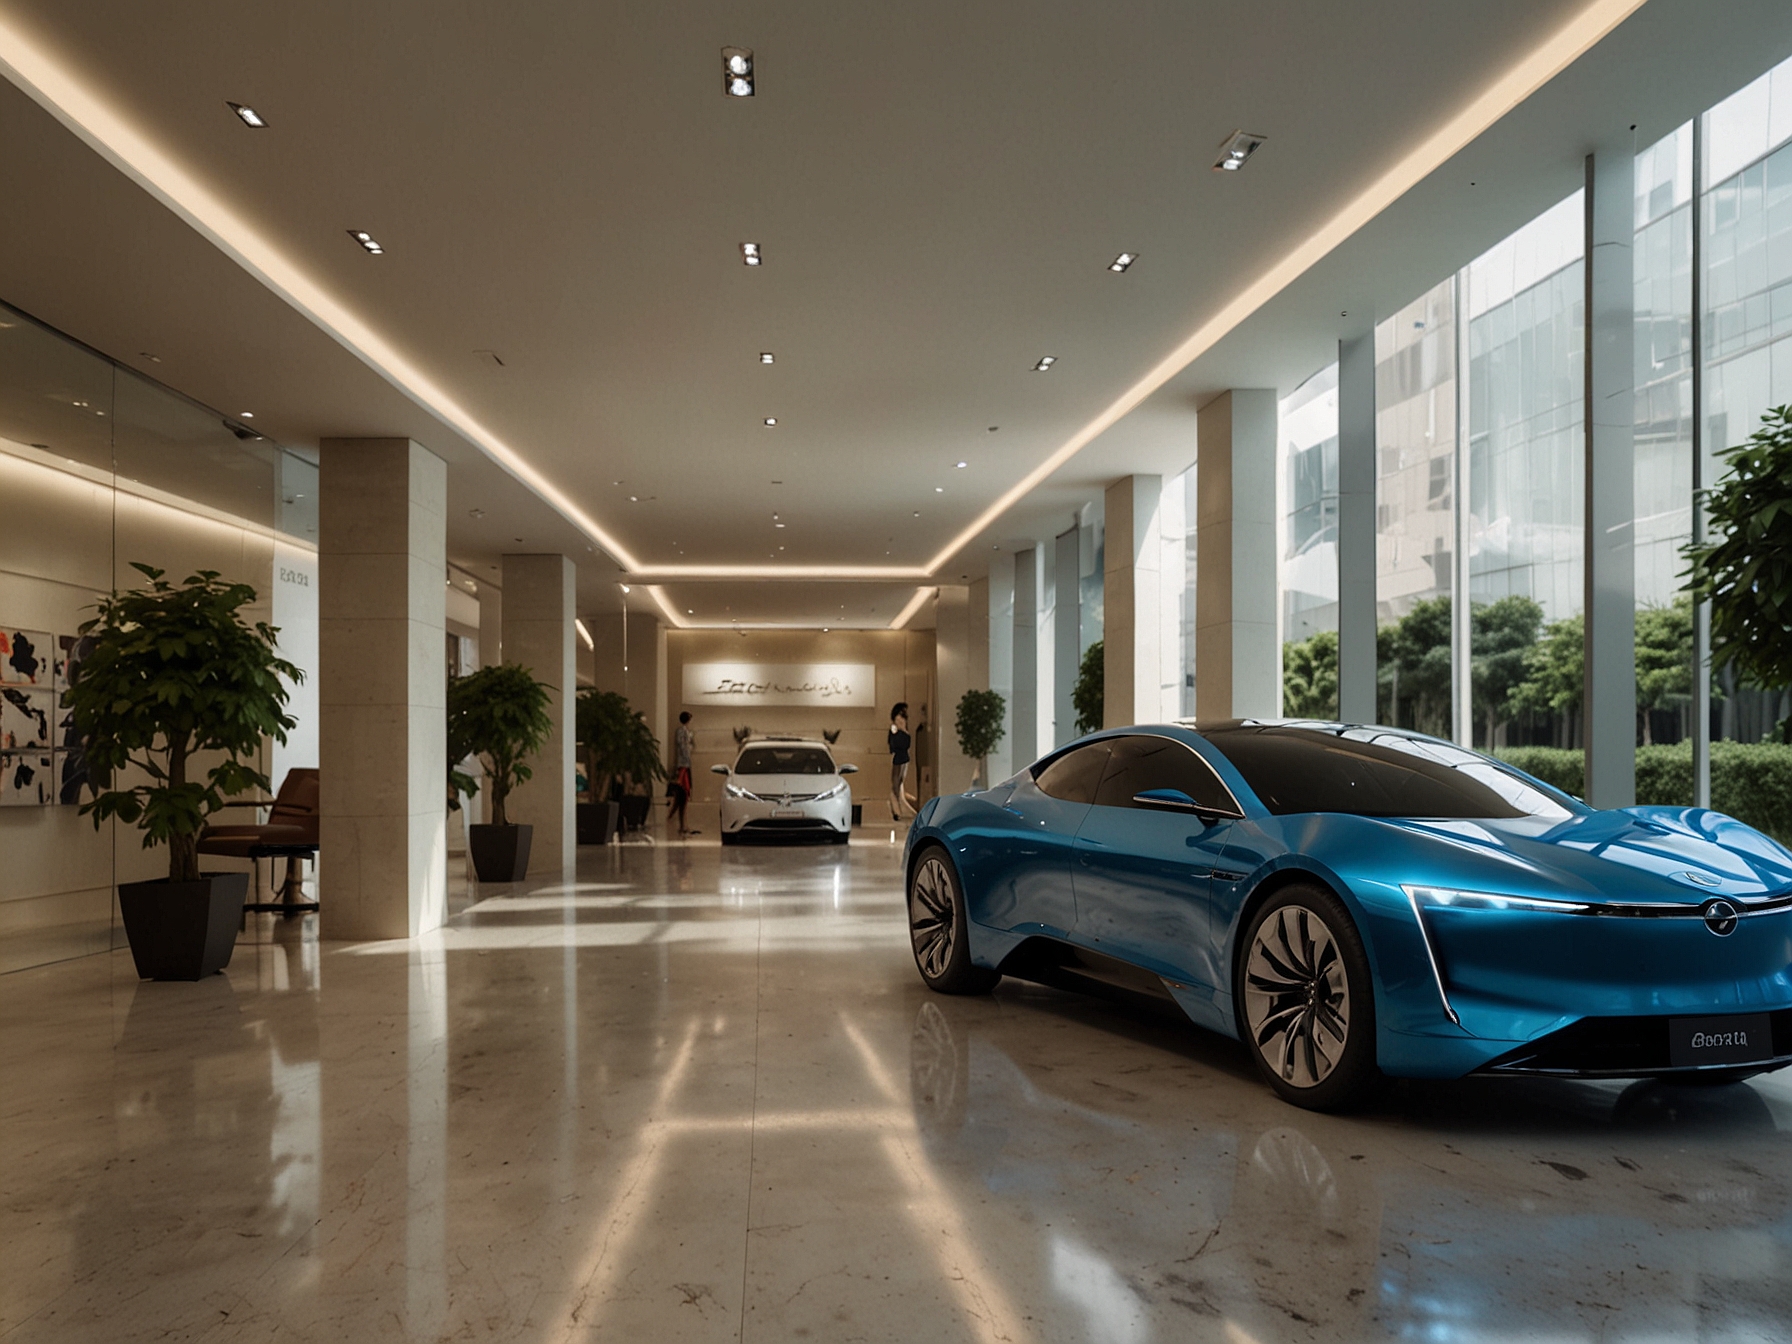 Denza's luxury EV showroom, a chic and high-tech space, attracts numerous visitors, epitomizing the transformation of Hong Kong's retail property market driven by green technology.